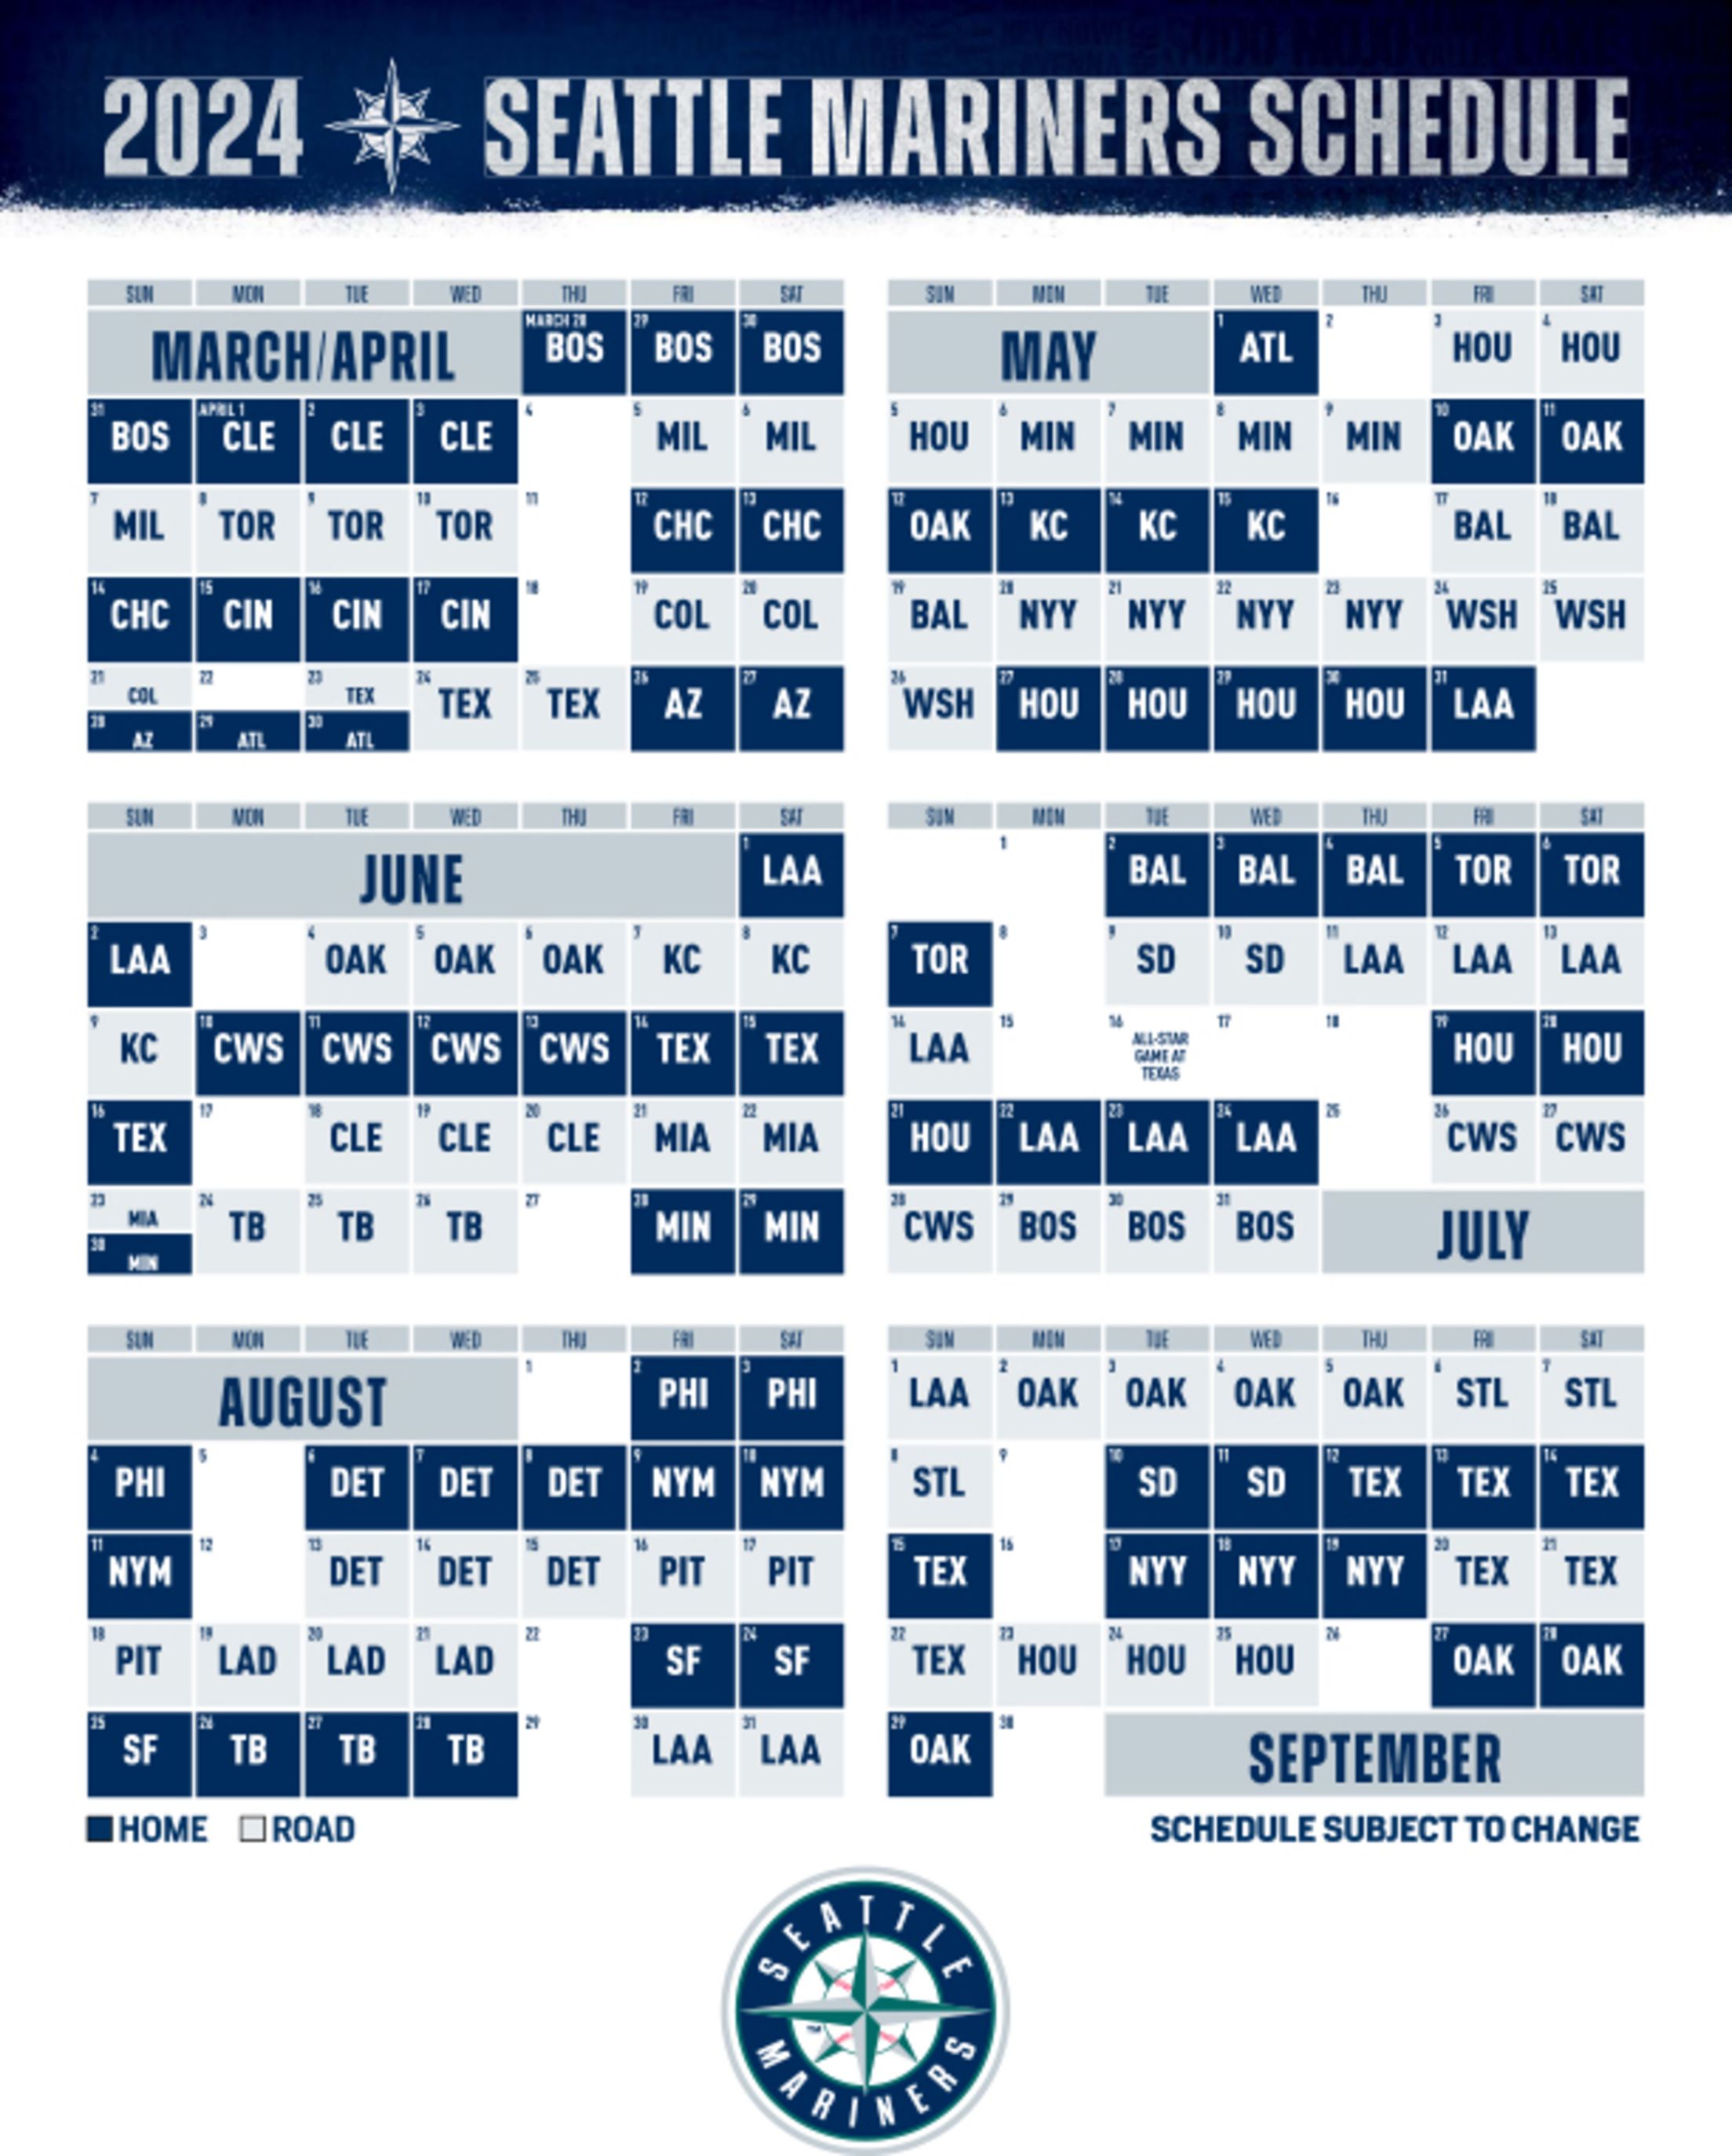 Mariners announce details of revised 2022 schedule